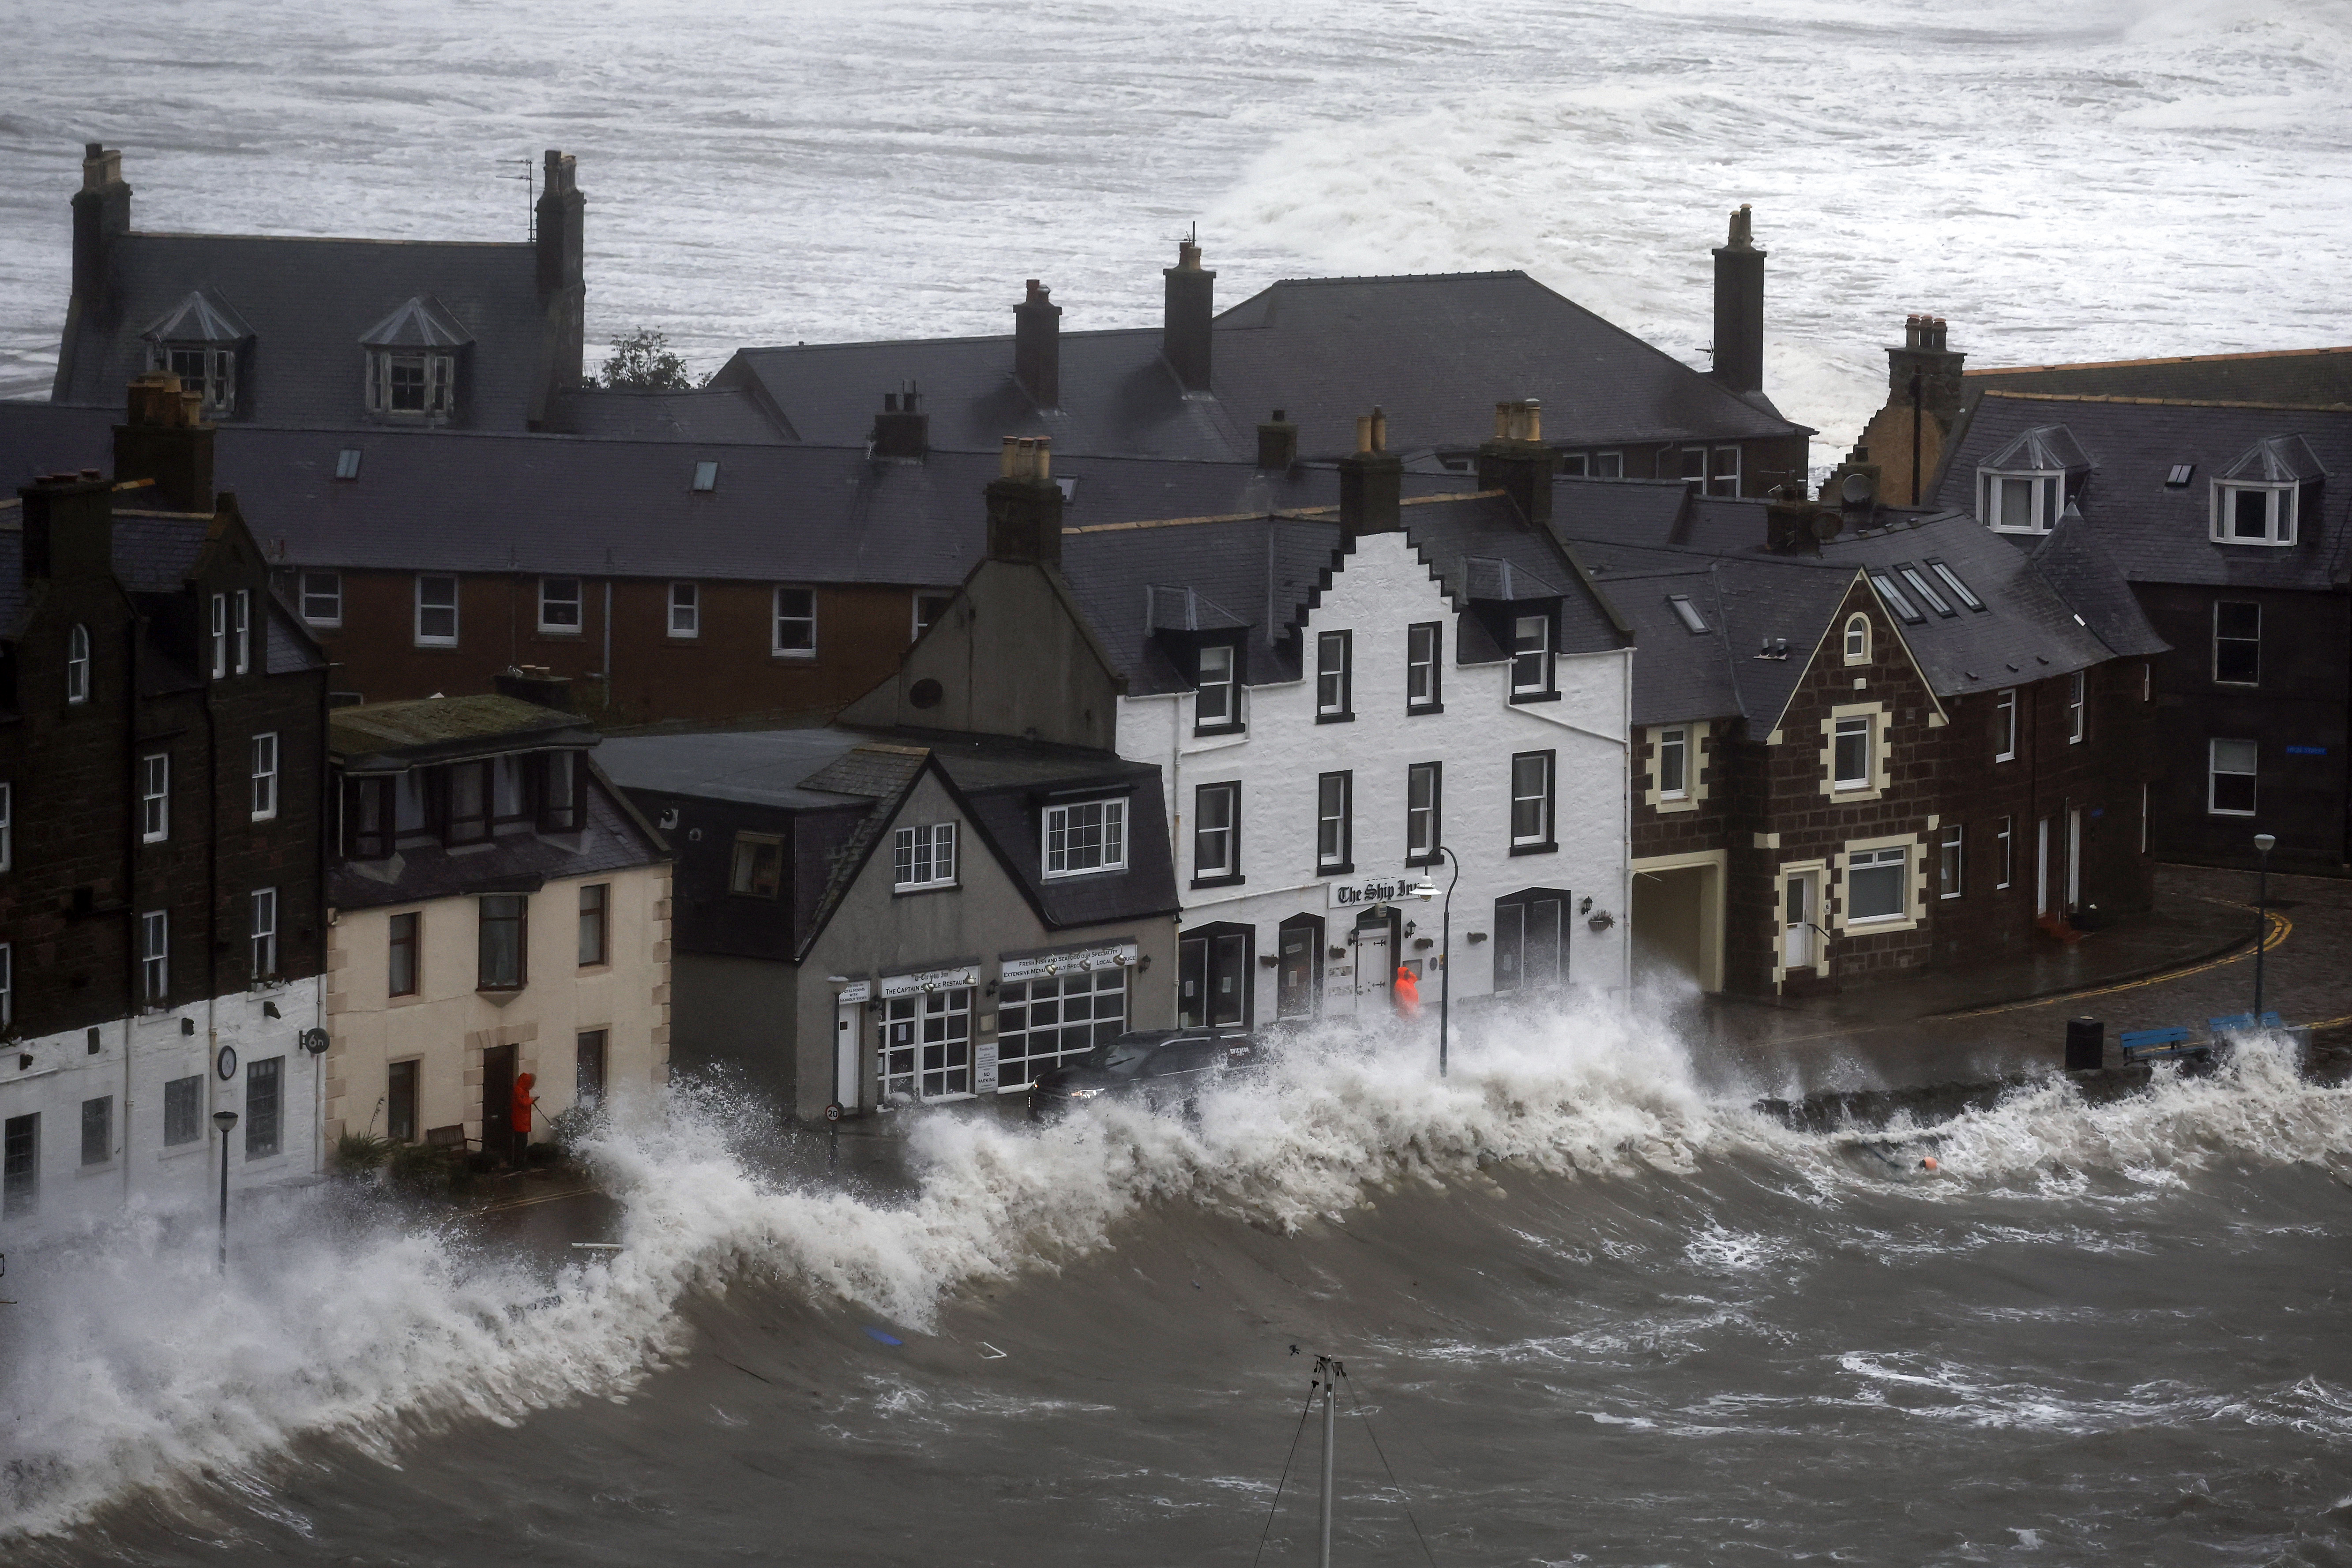 Thousands of homes have been left without power due to severe flooding in the east of Scotland.